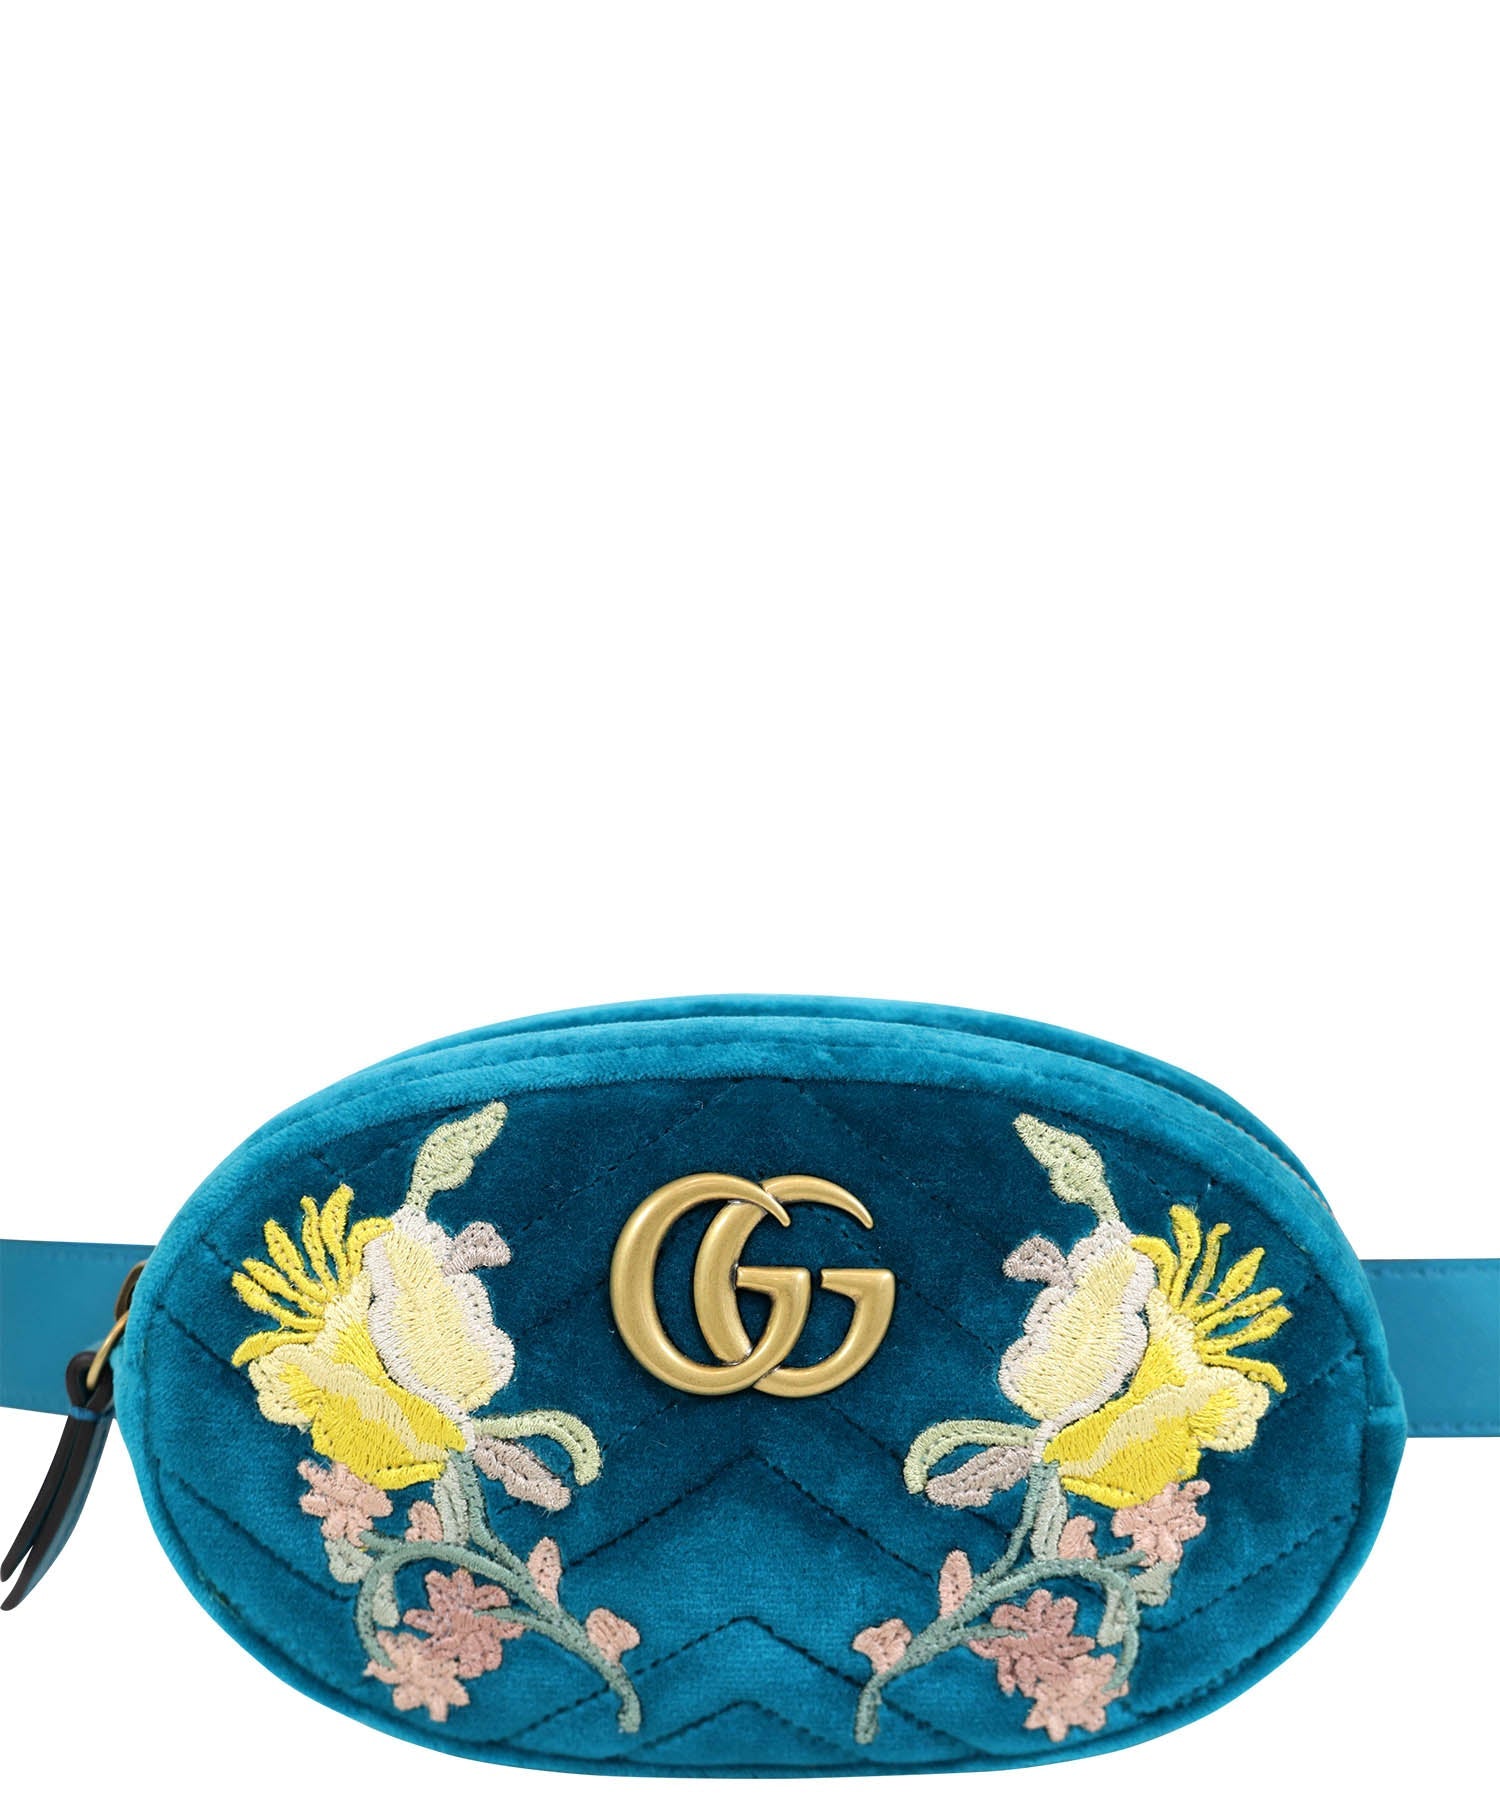 Gucci Marmont Embroidered Velvet Belt Foxy Couture Carmel